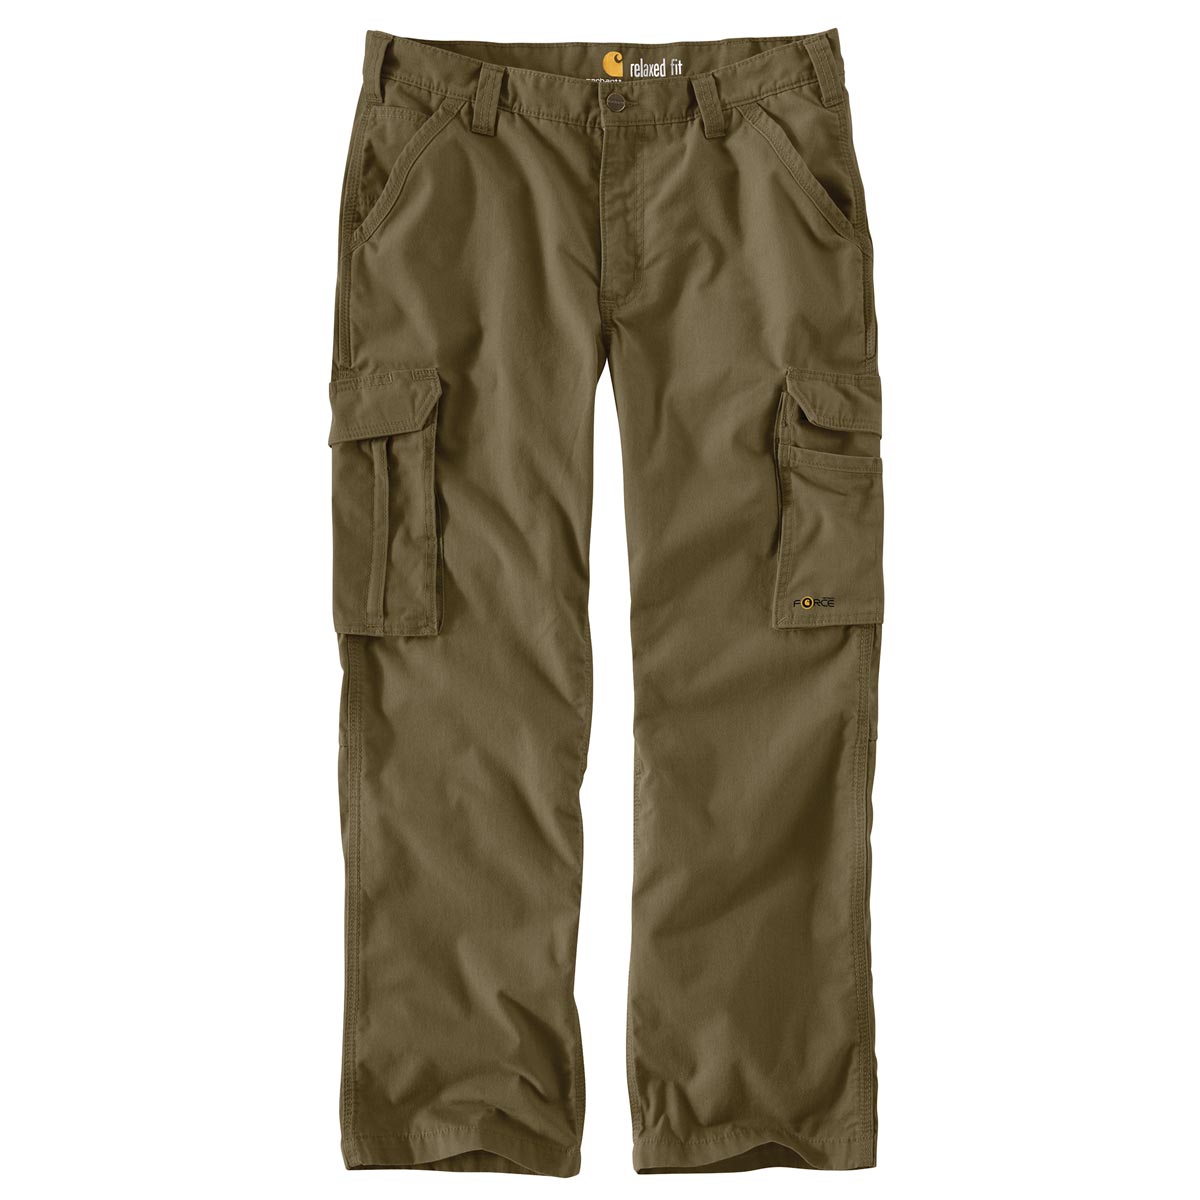 Carhartt Men's Force Tappan Cargo Pant Discontinued Pricing